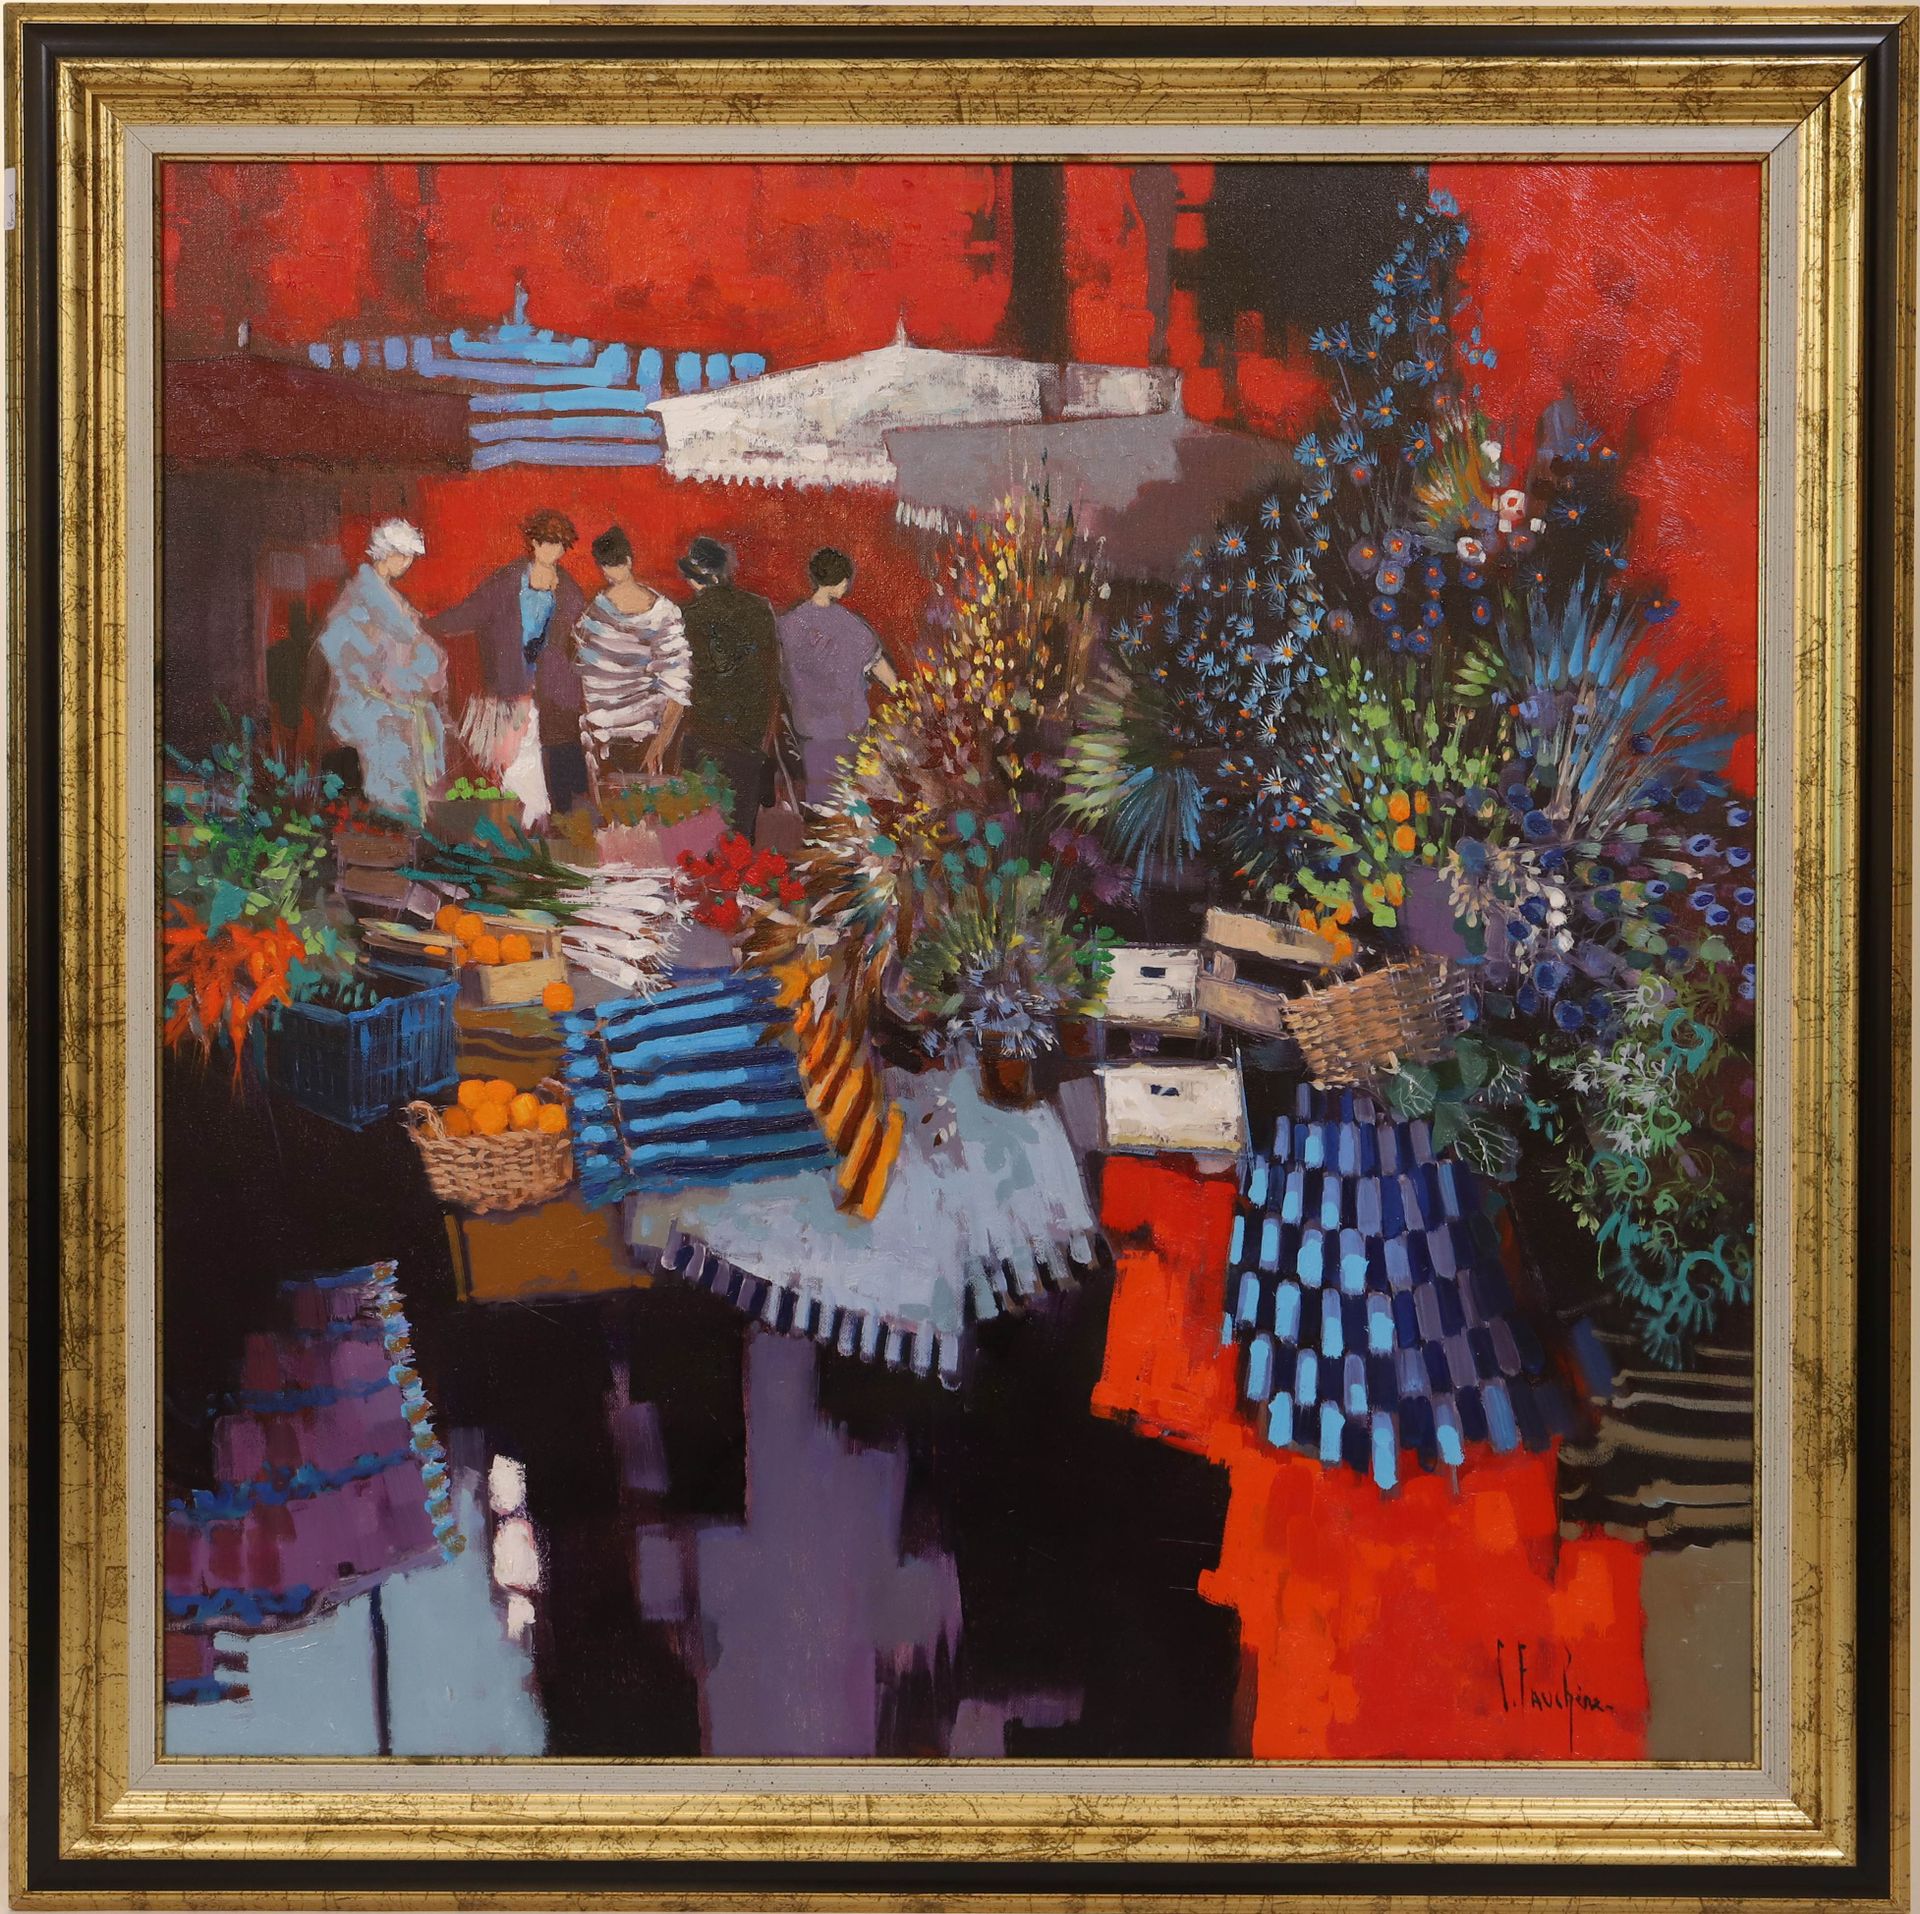 Null "The market" by Claude FAUCHERE (1936-2019)

French painter

Oil on canvas,&hellip;